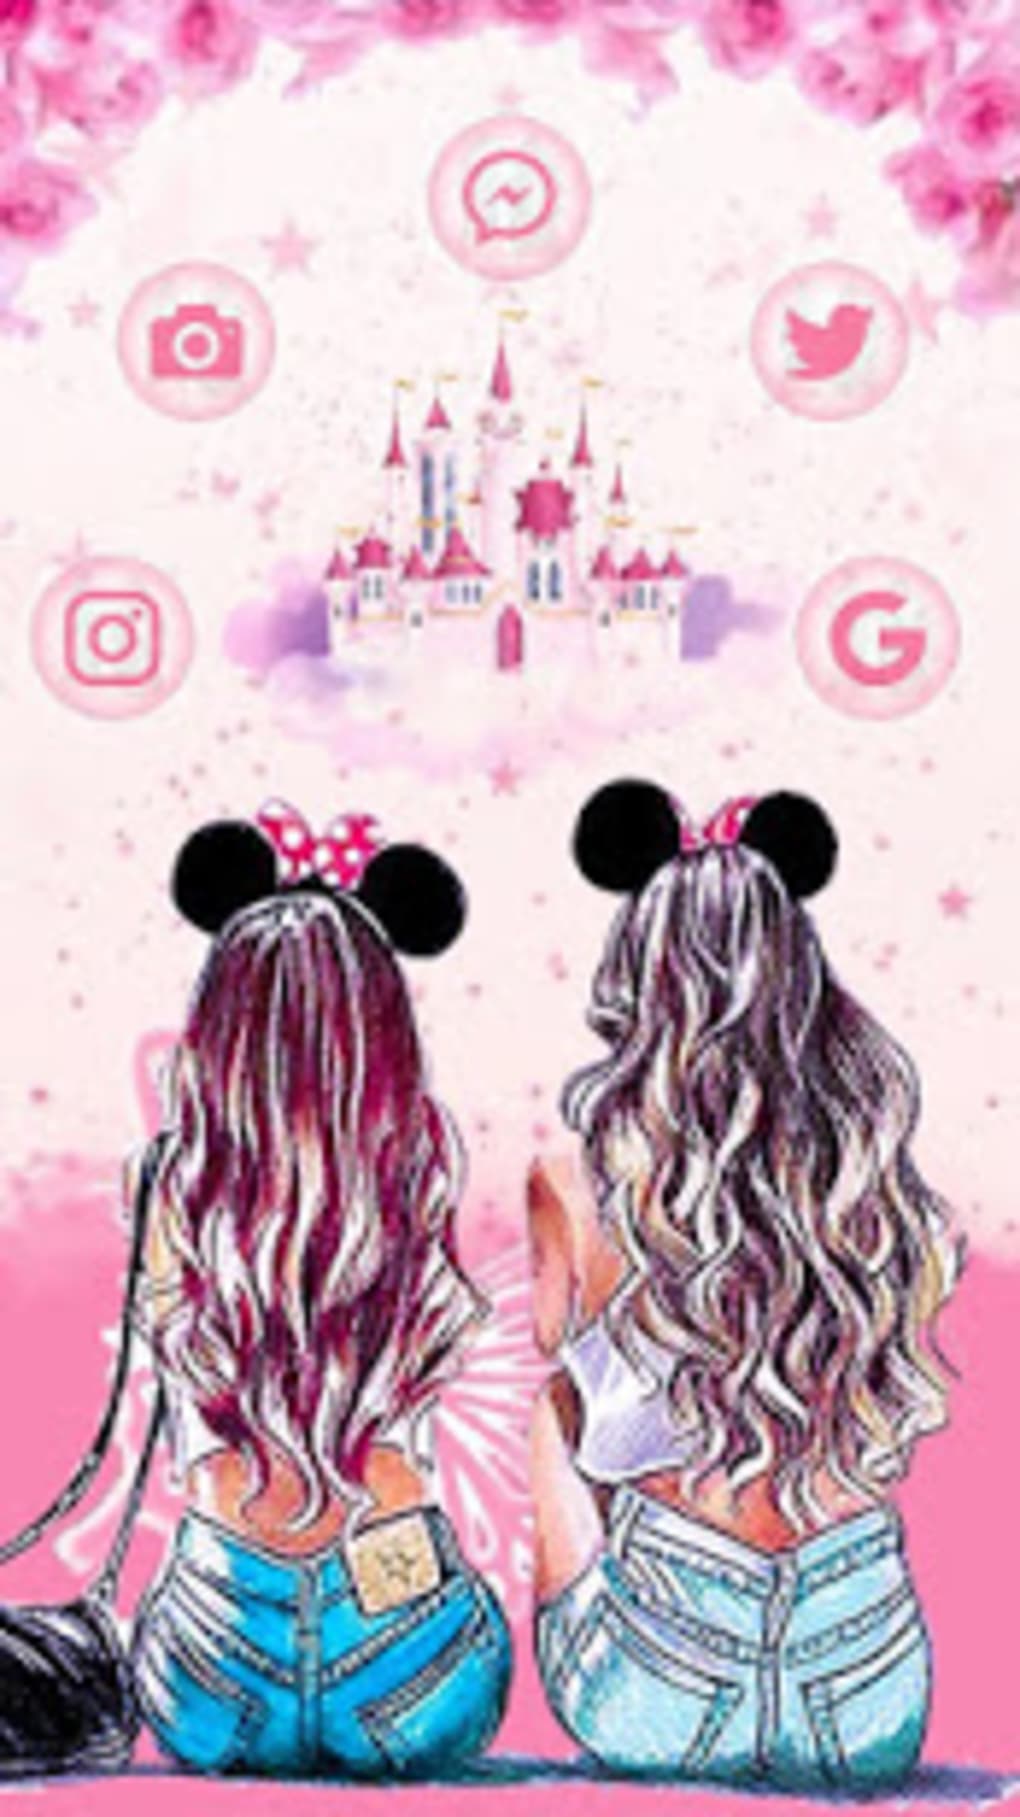 Girls Friendship Themes Live Wallpapers - Best Friend Pictures Drawing -  1020x1817 Wallpaper 